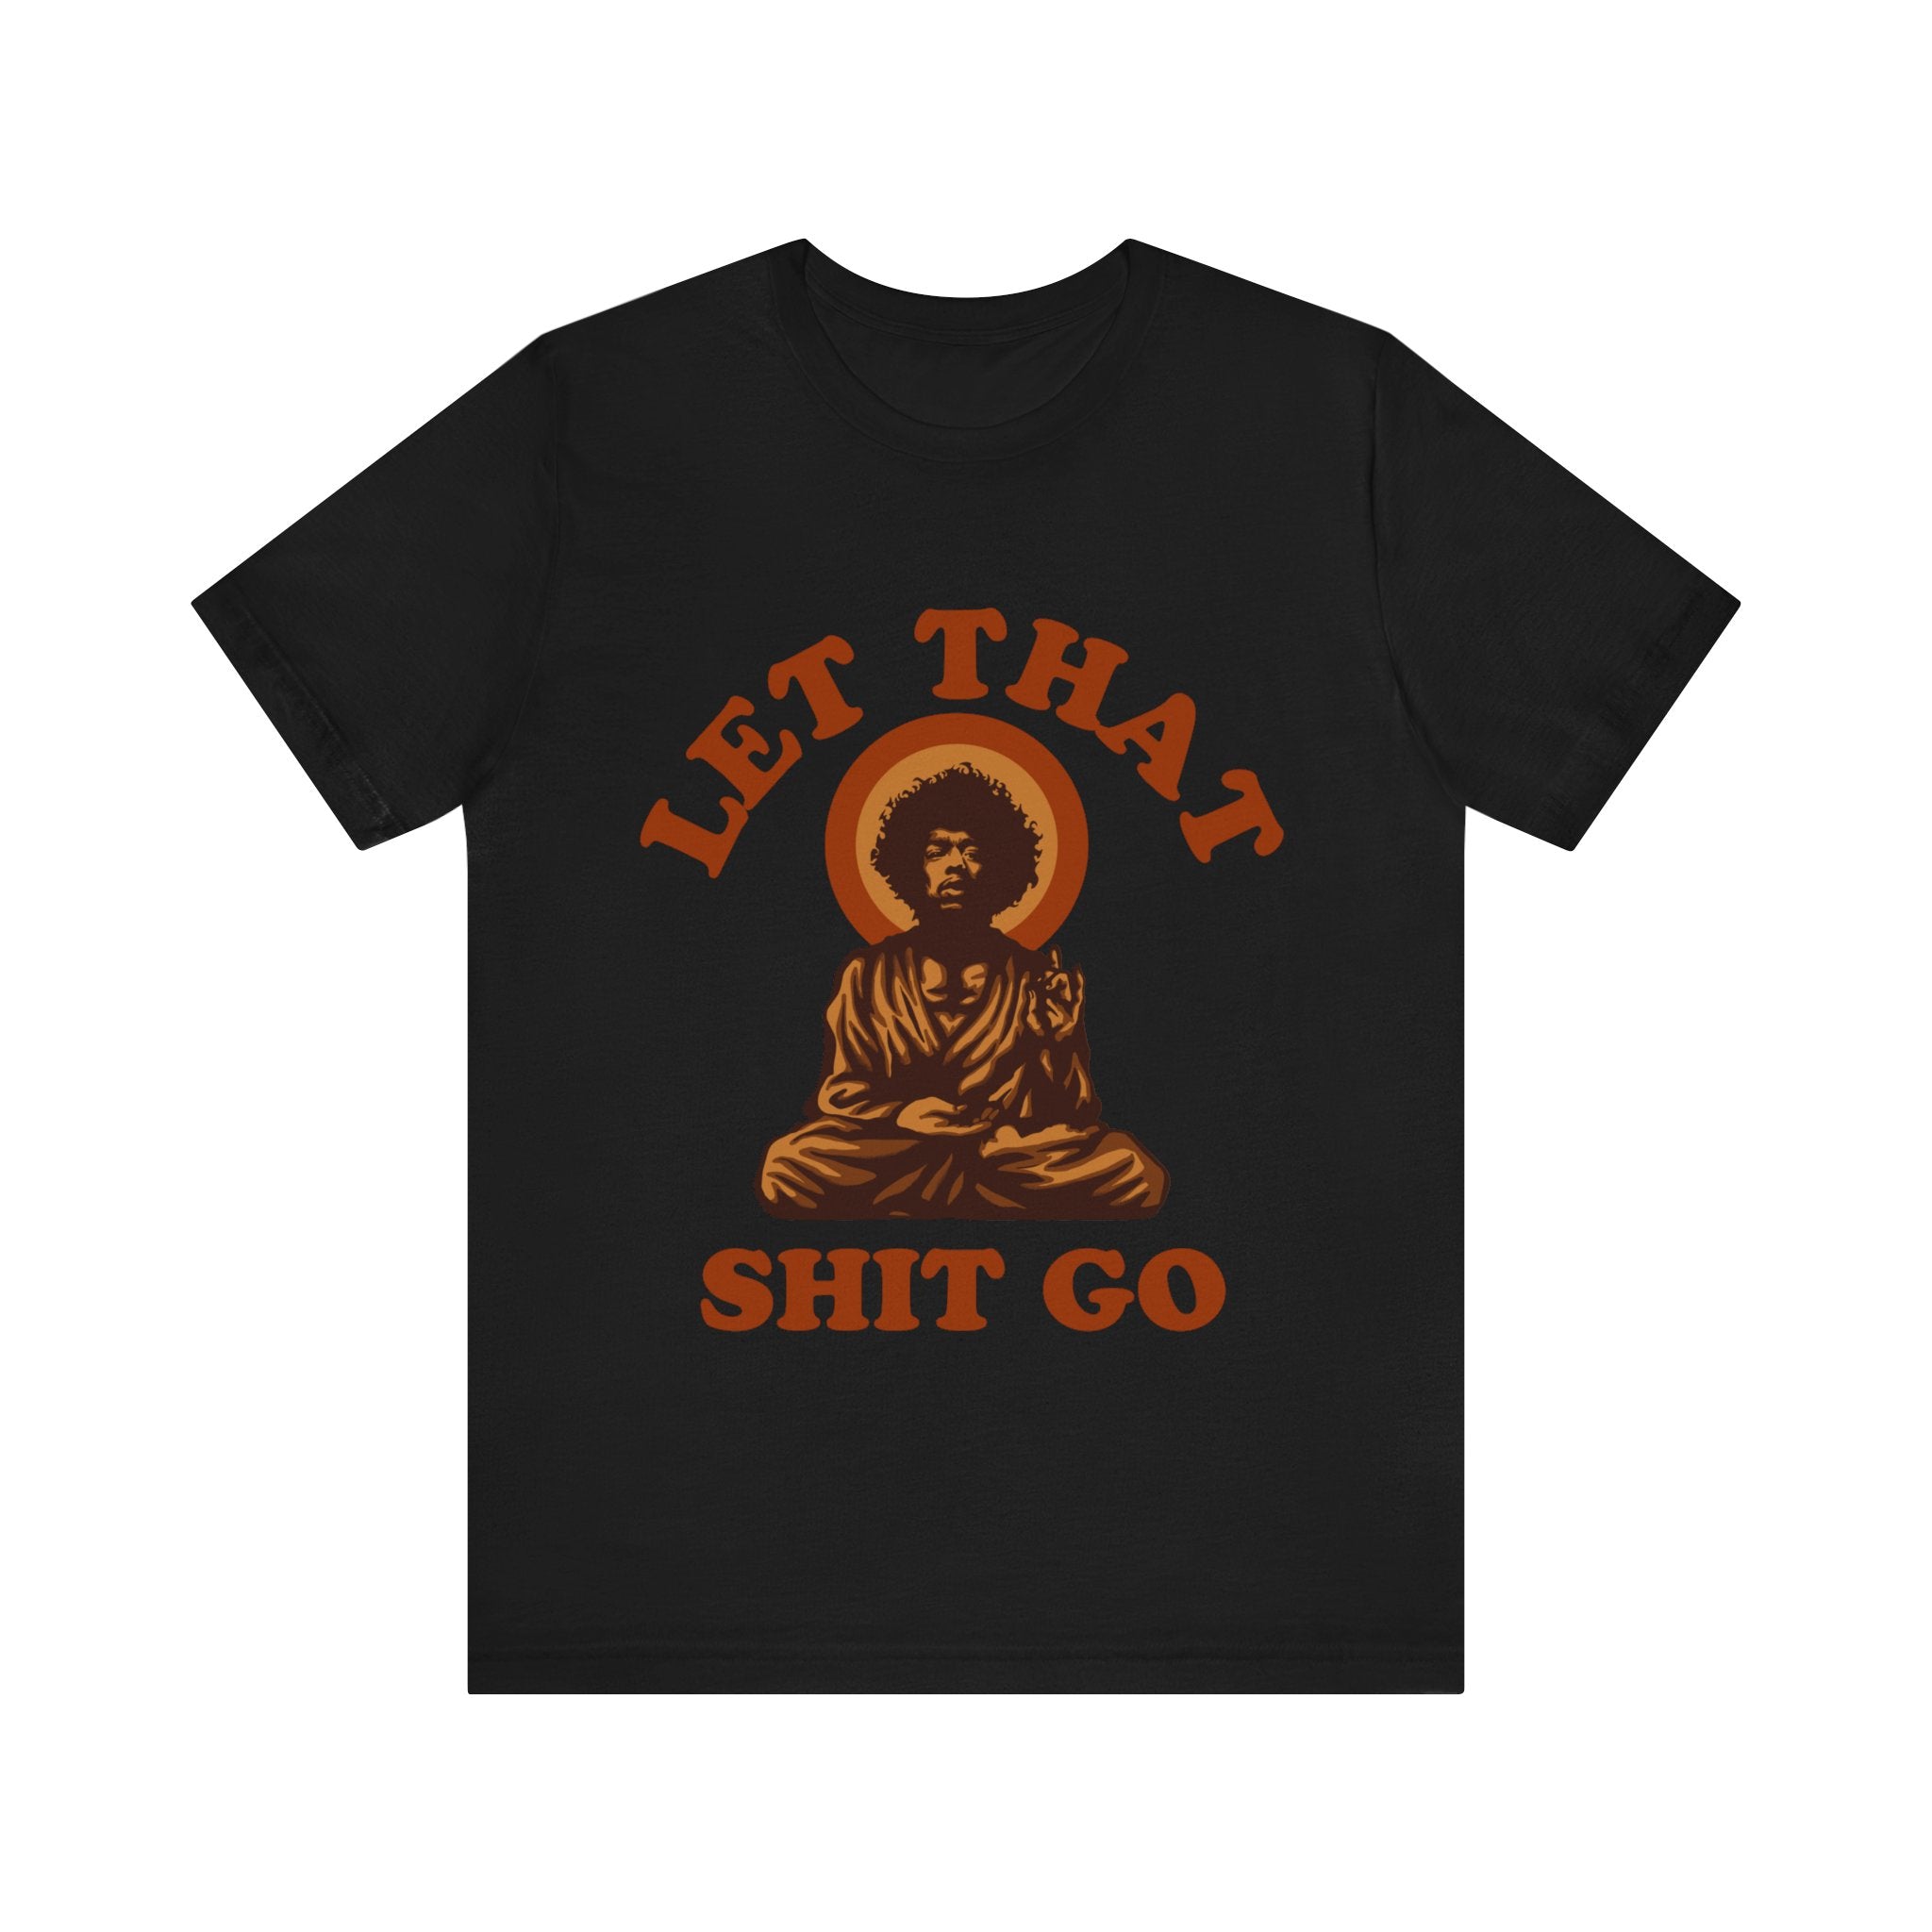 Black Let That Shit Go T-Shirt featuring a graphic of a meditating figure in orange, surrounded by a halo, with the phrase "let that shit go" below.